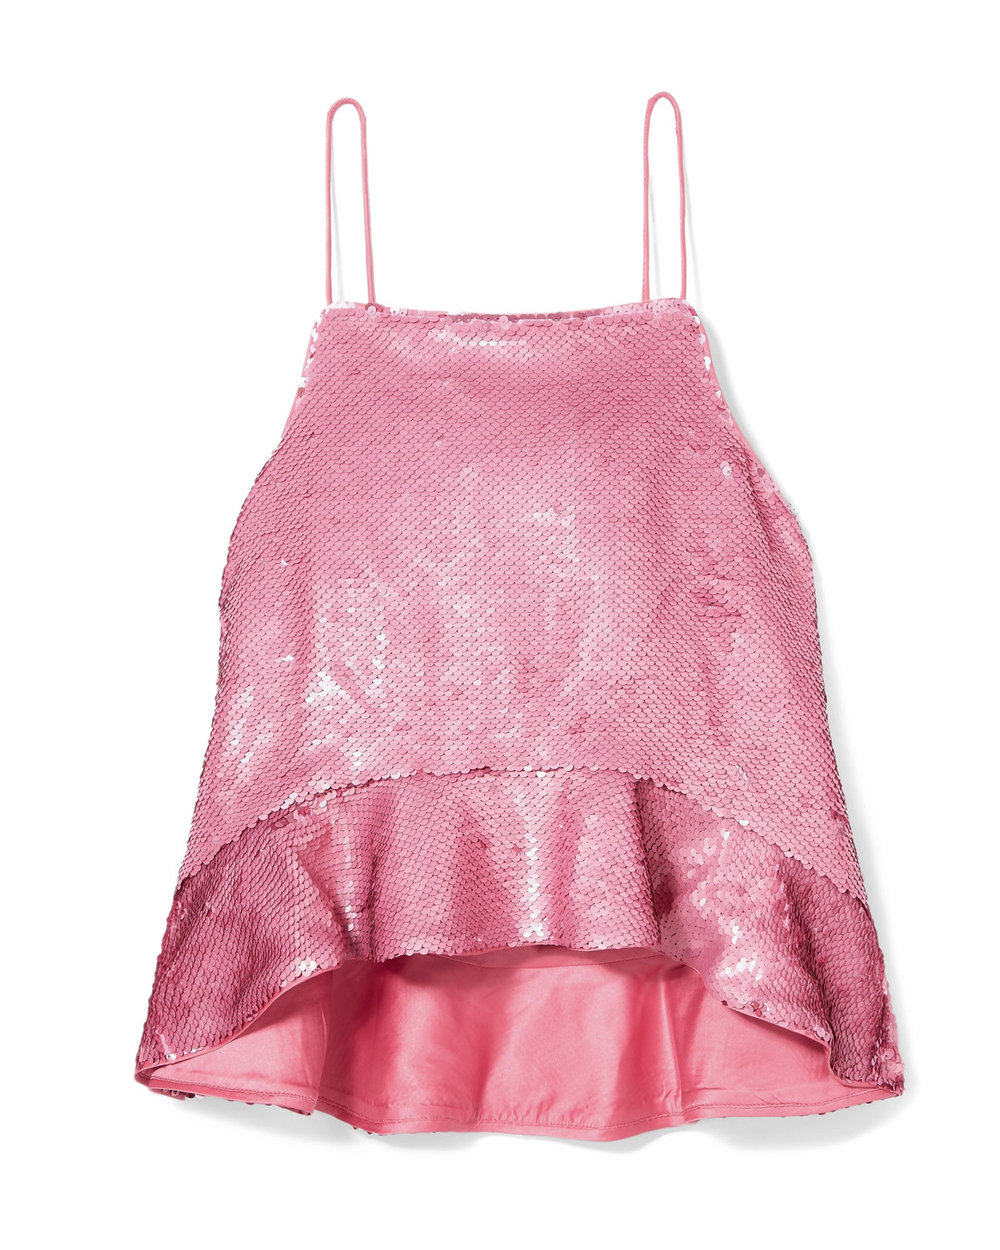 Ganni sequinned camisole, $297 USD from Net-a-Porter